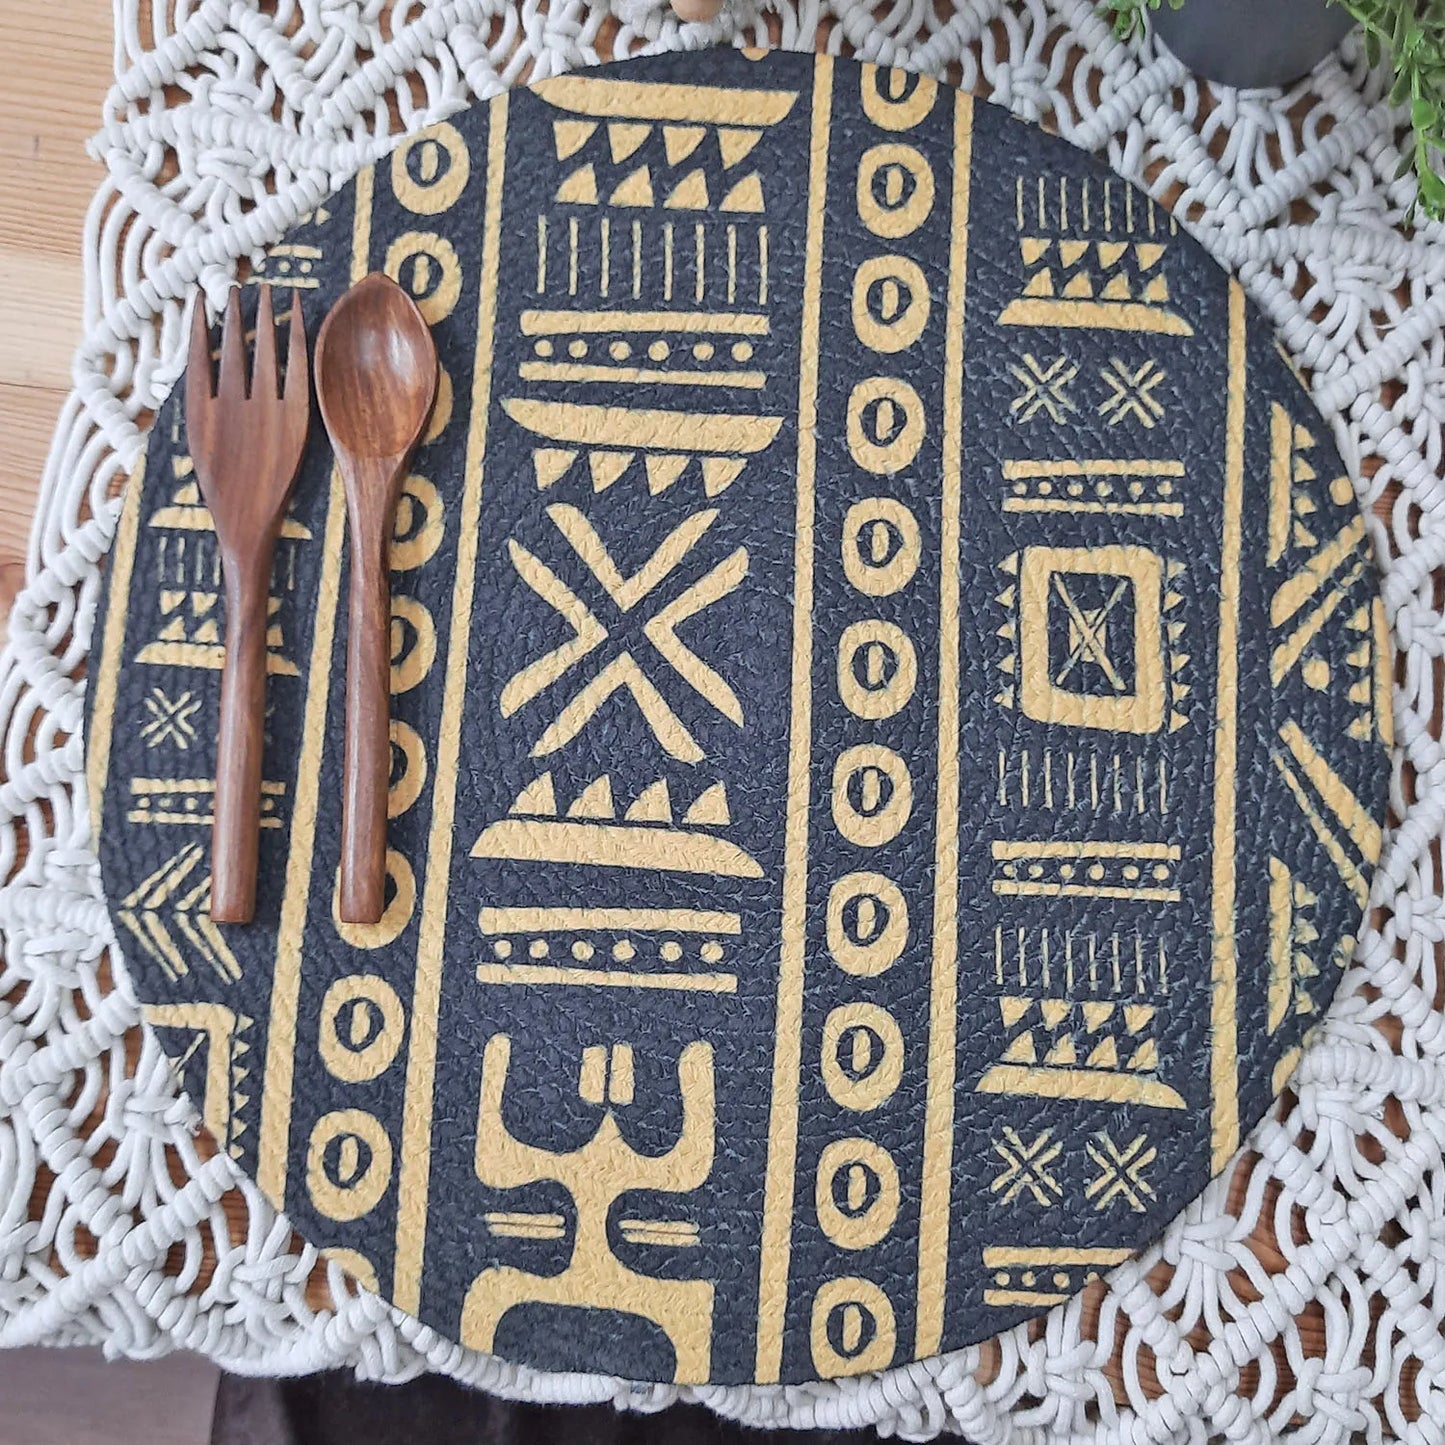 All Natural Round Cotton Braided Placemats – African Tribal